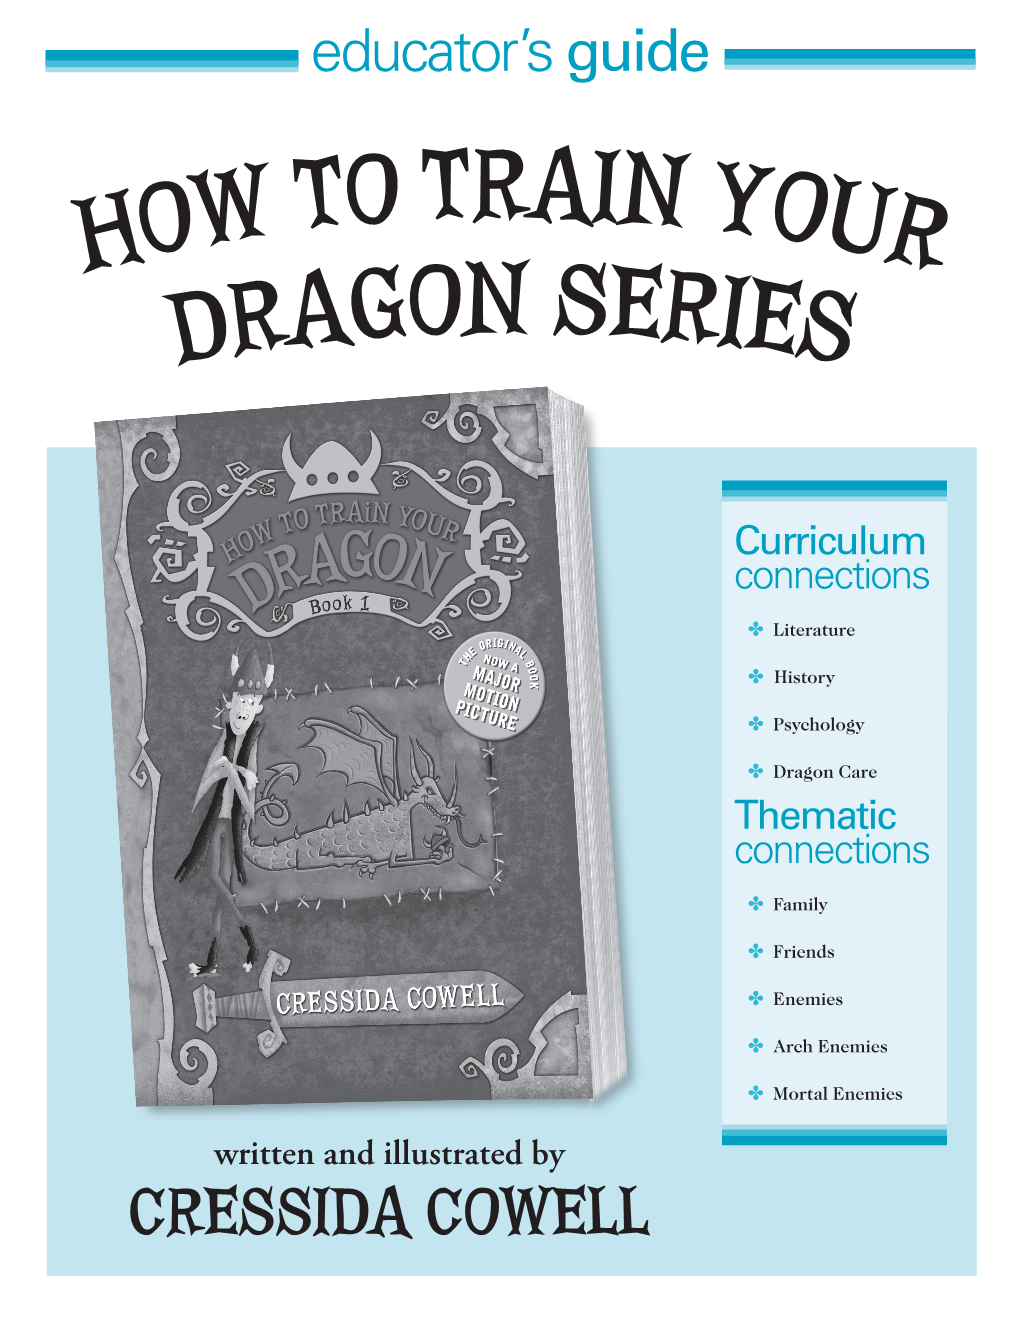 How to Train Your Dragon Series